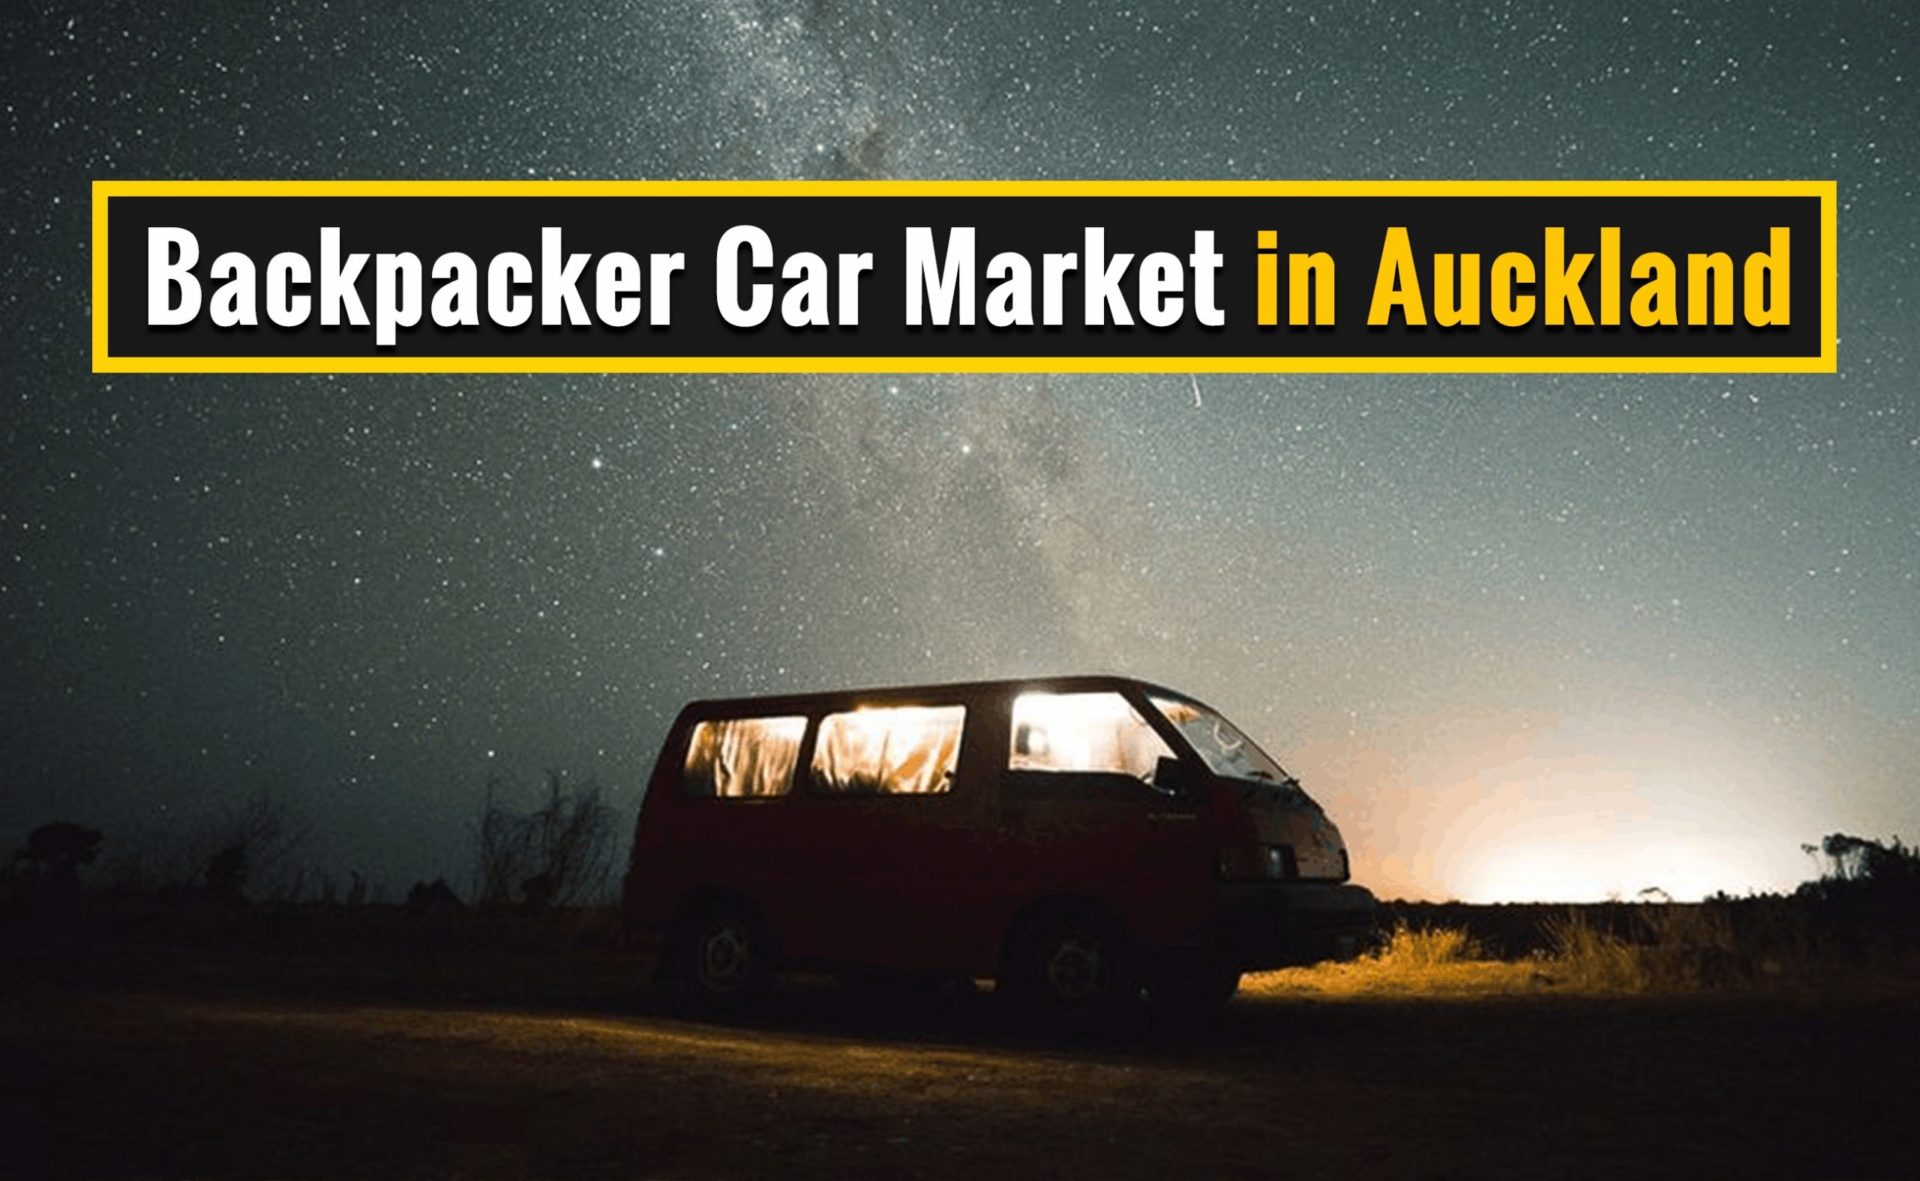 Backpacker car market in Auckland